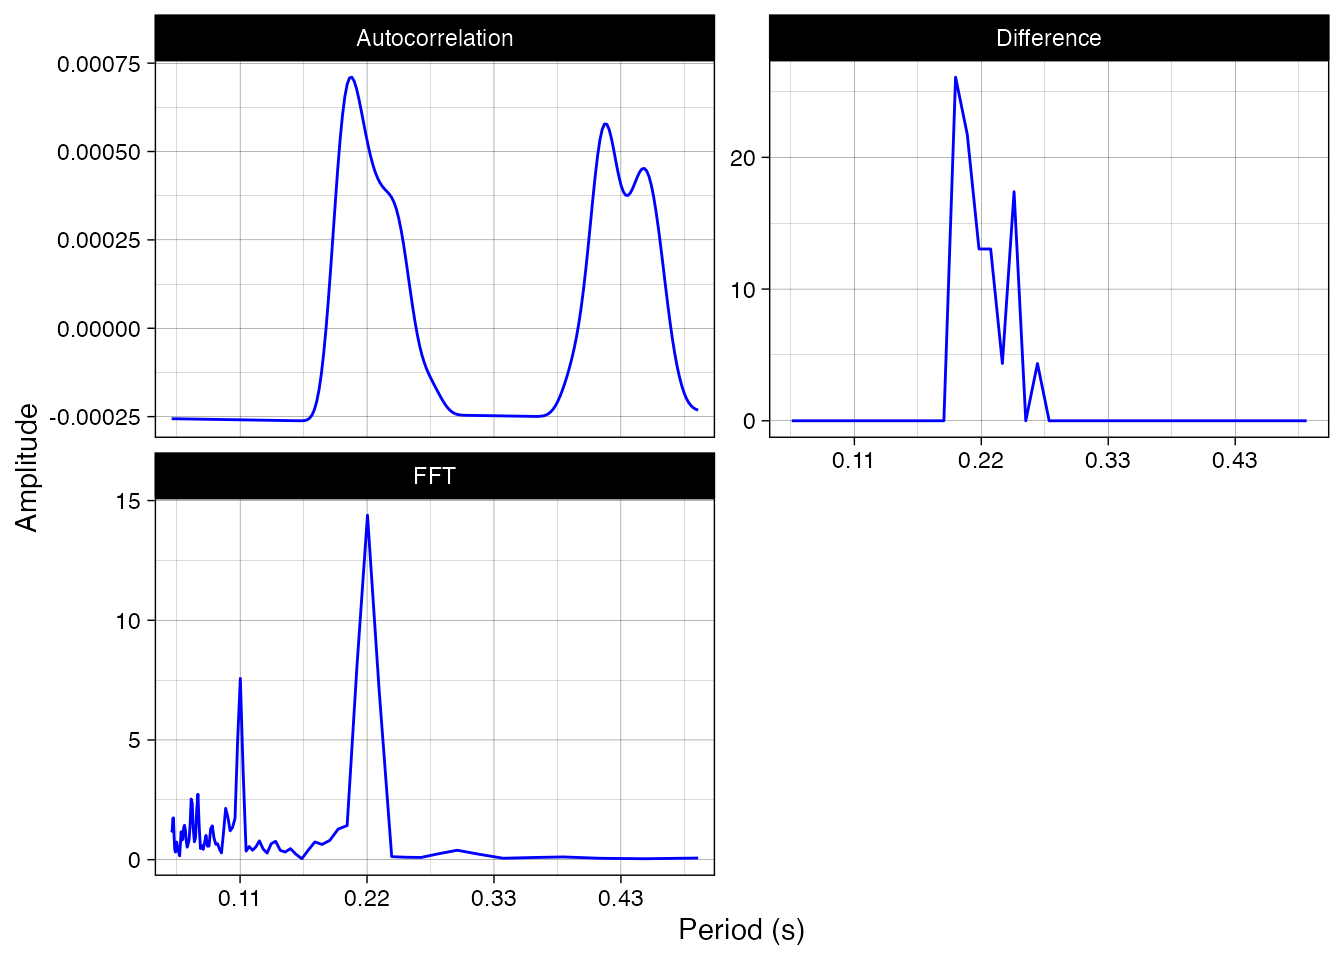 Figure 2. Periodicity analysis of a 5-second extract of guitar playing in Cuban son using difference in onset times as a primitive periodicity measure, the output from autocorrelation function, and the estimation of periodicity by FFT.